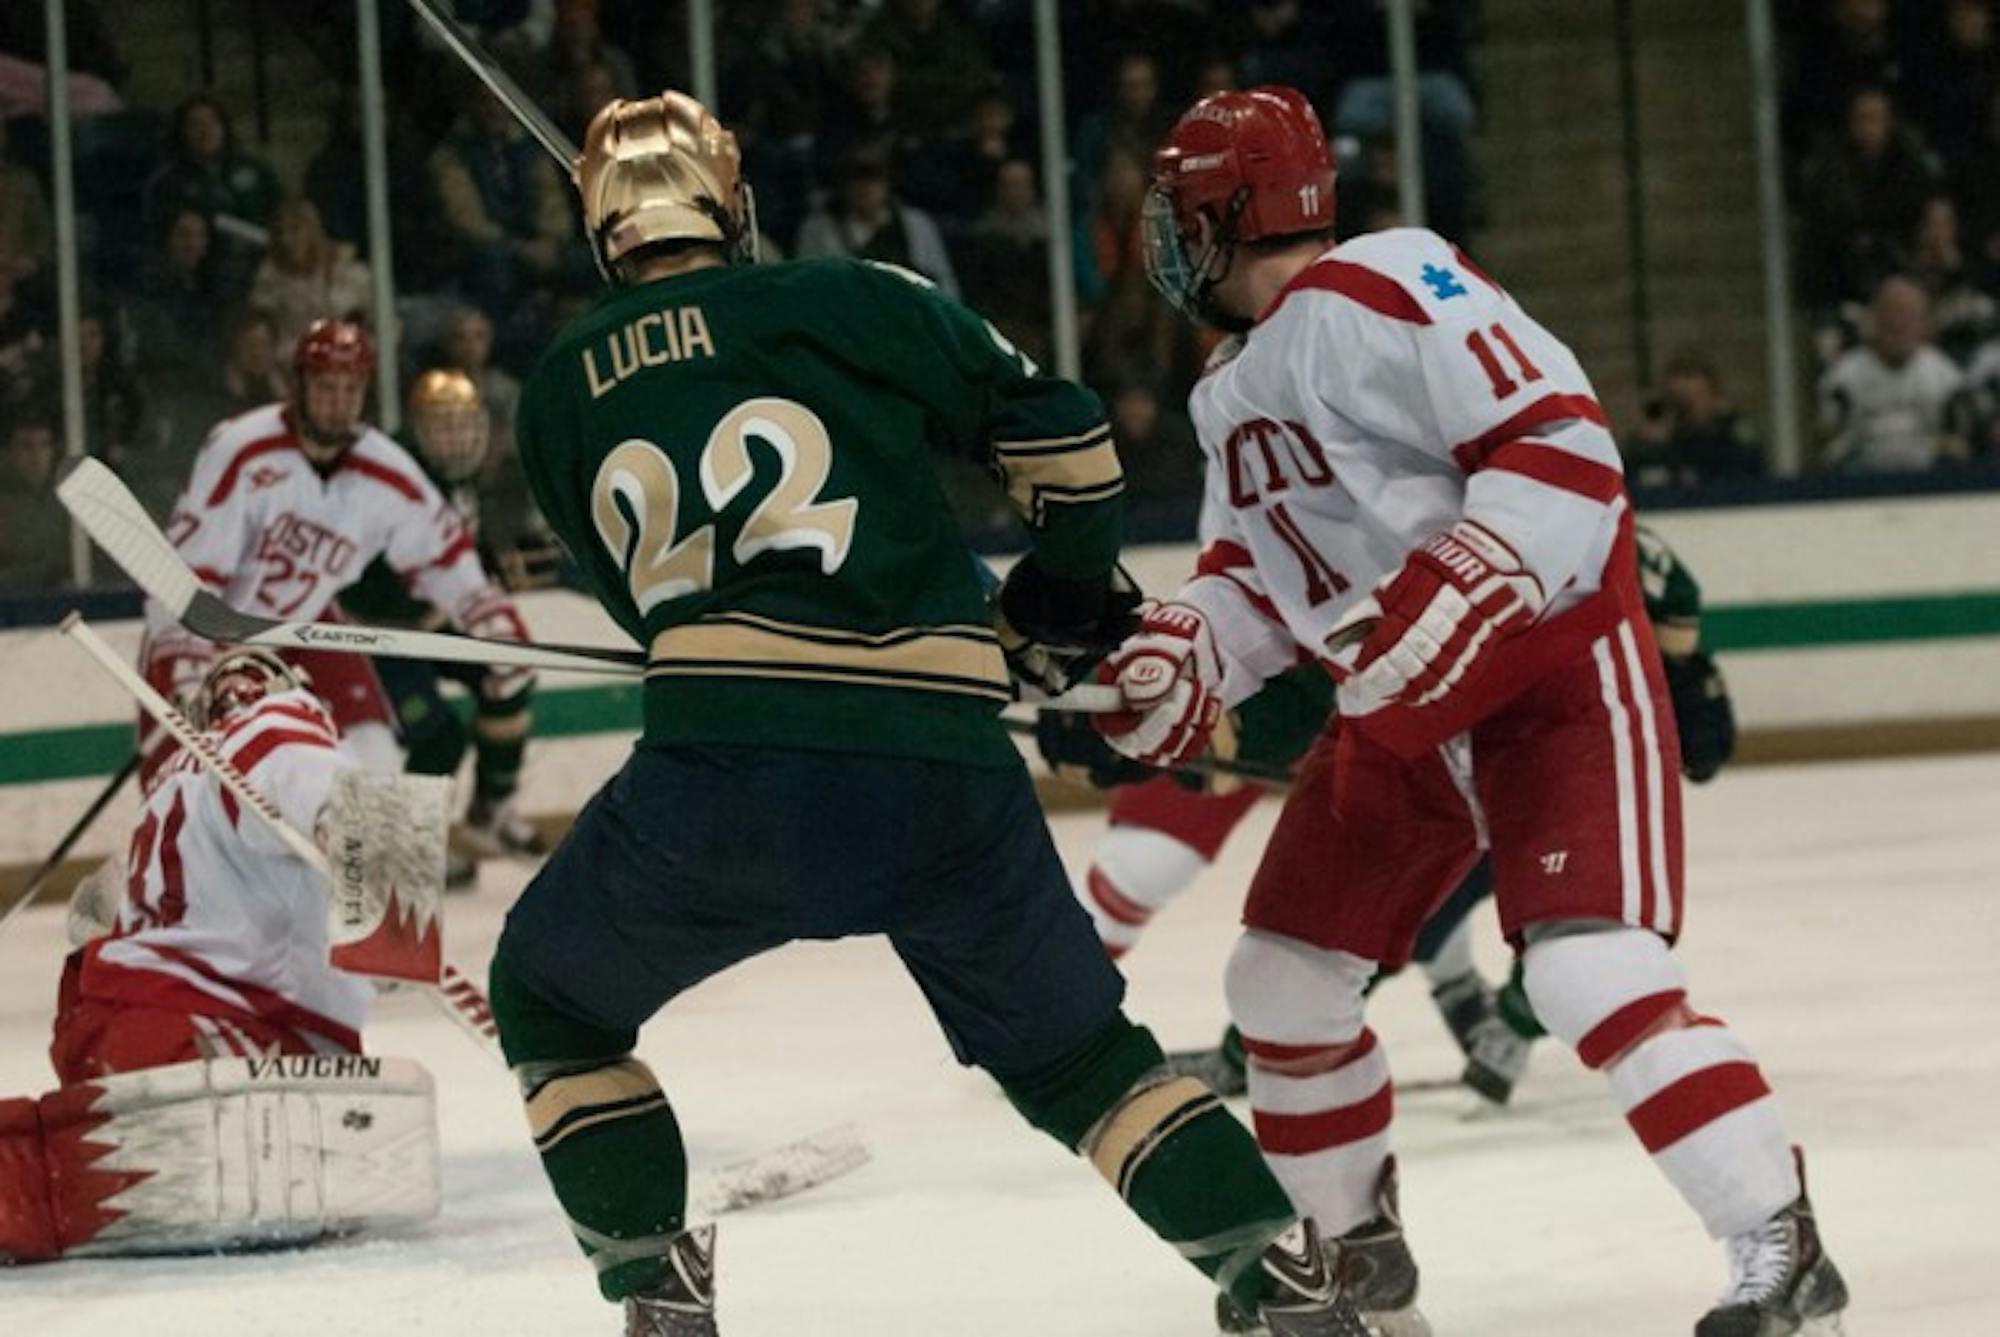 Irish sophomore forward Mario Lucia takes a shot during Notre Dame's 2-0 victory over Boston University on Feb. 22.